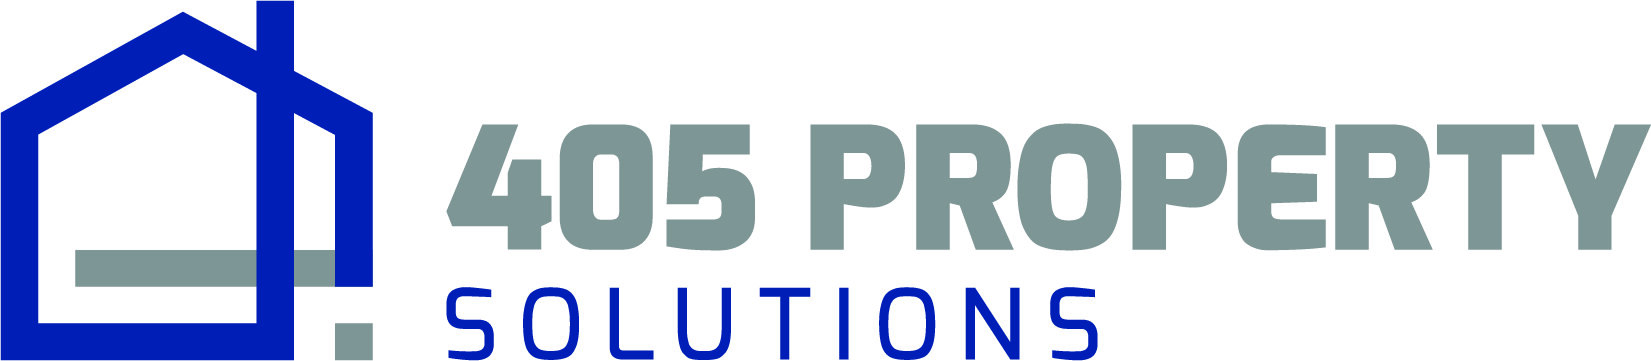 405 Property Solutions logo